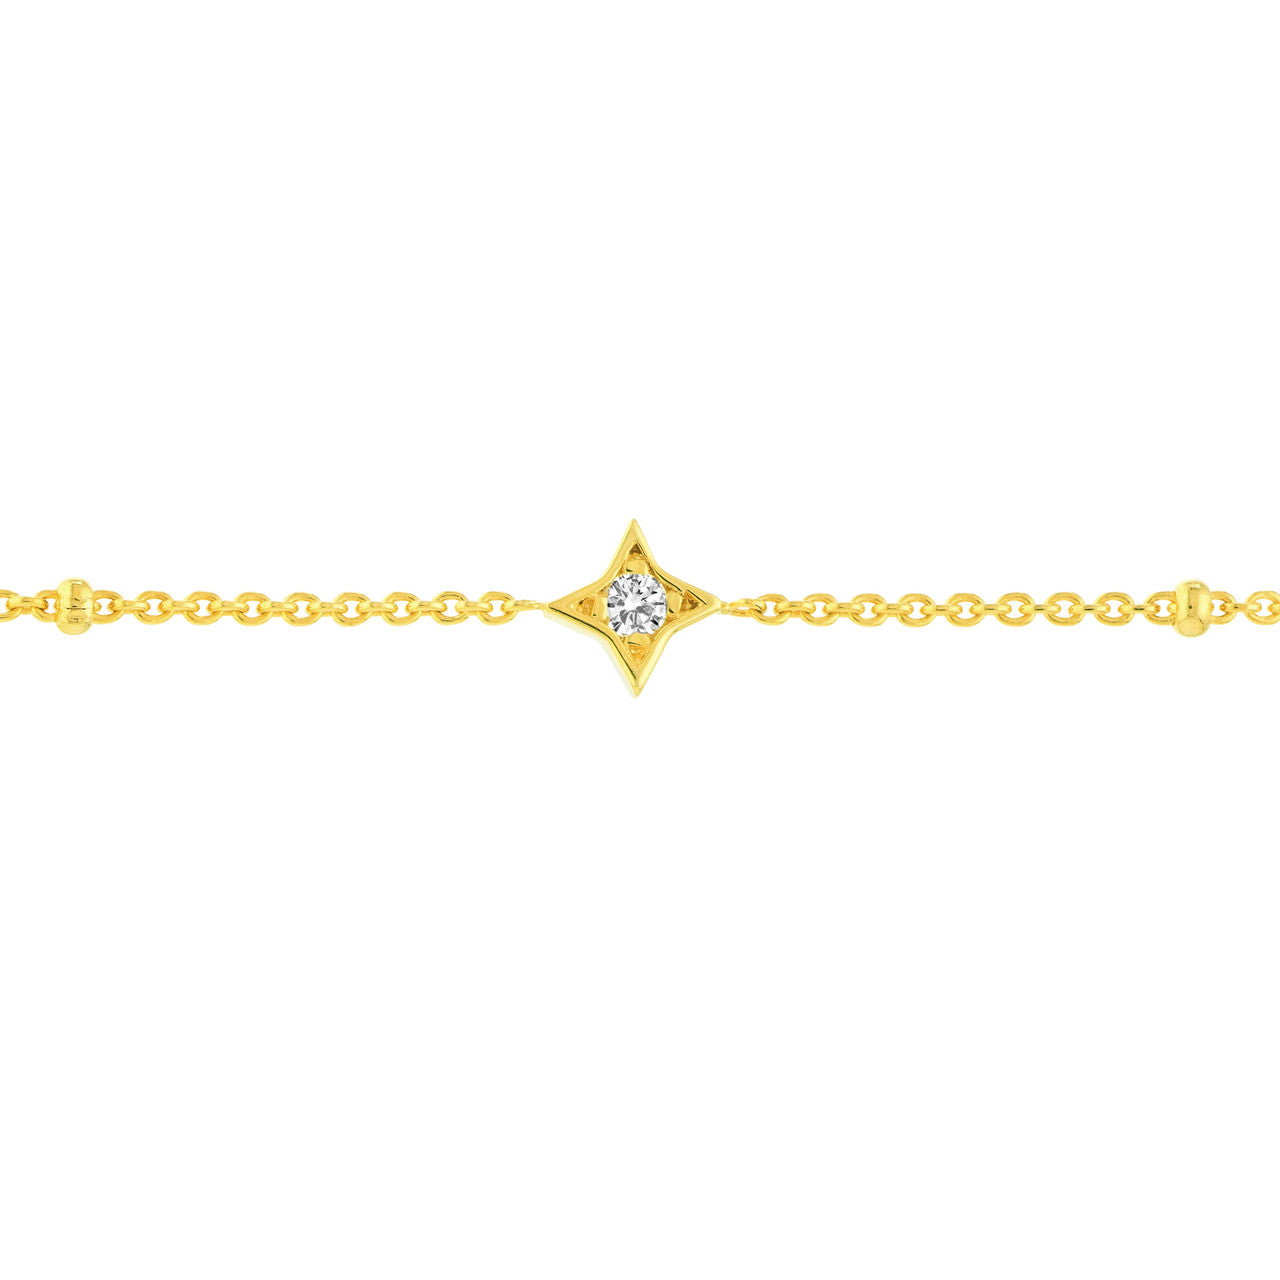 A yellow gold bracelet with a diamond